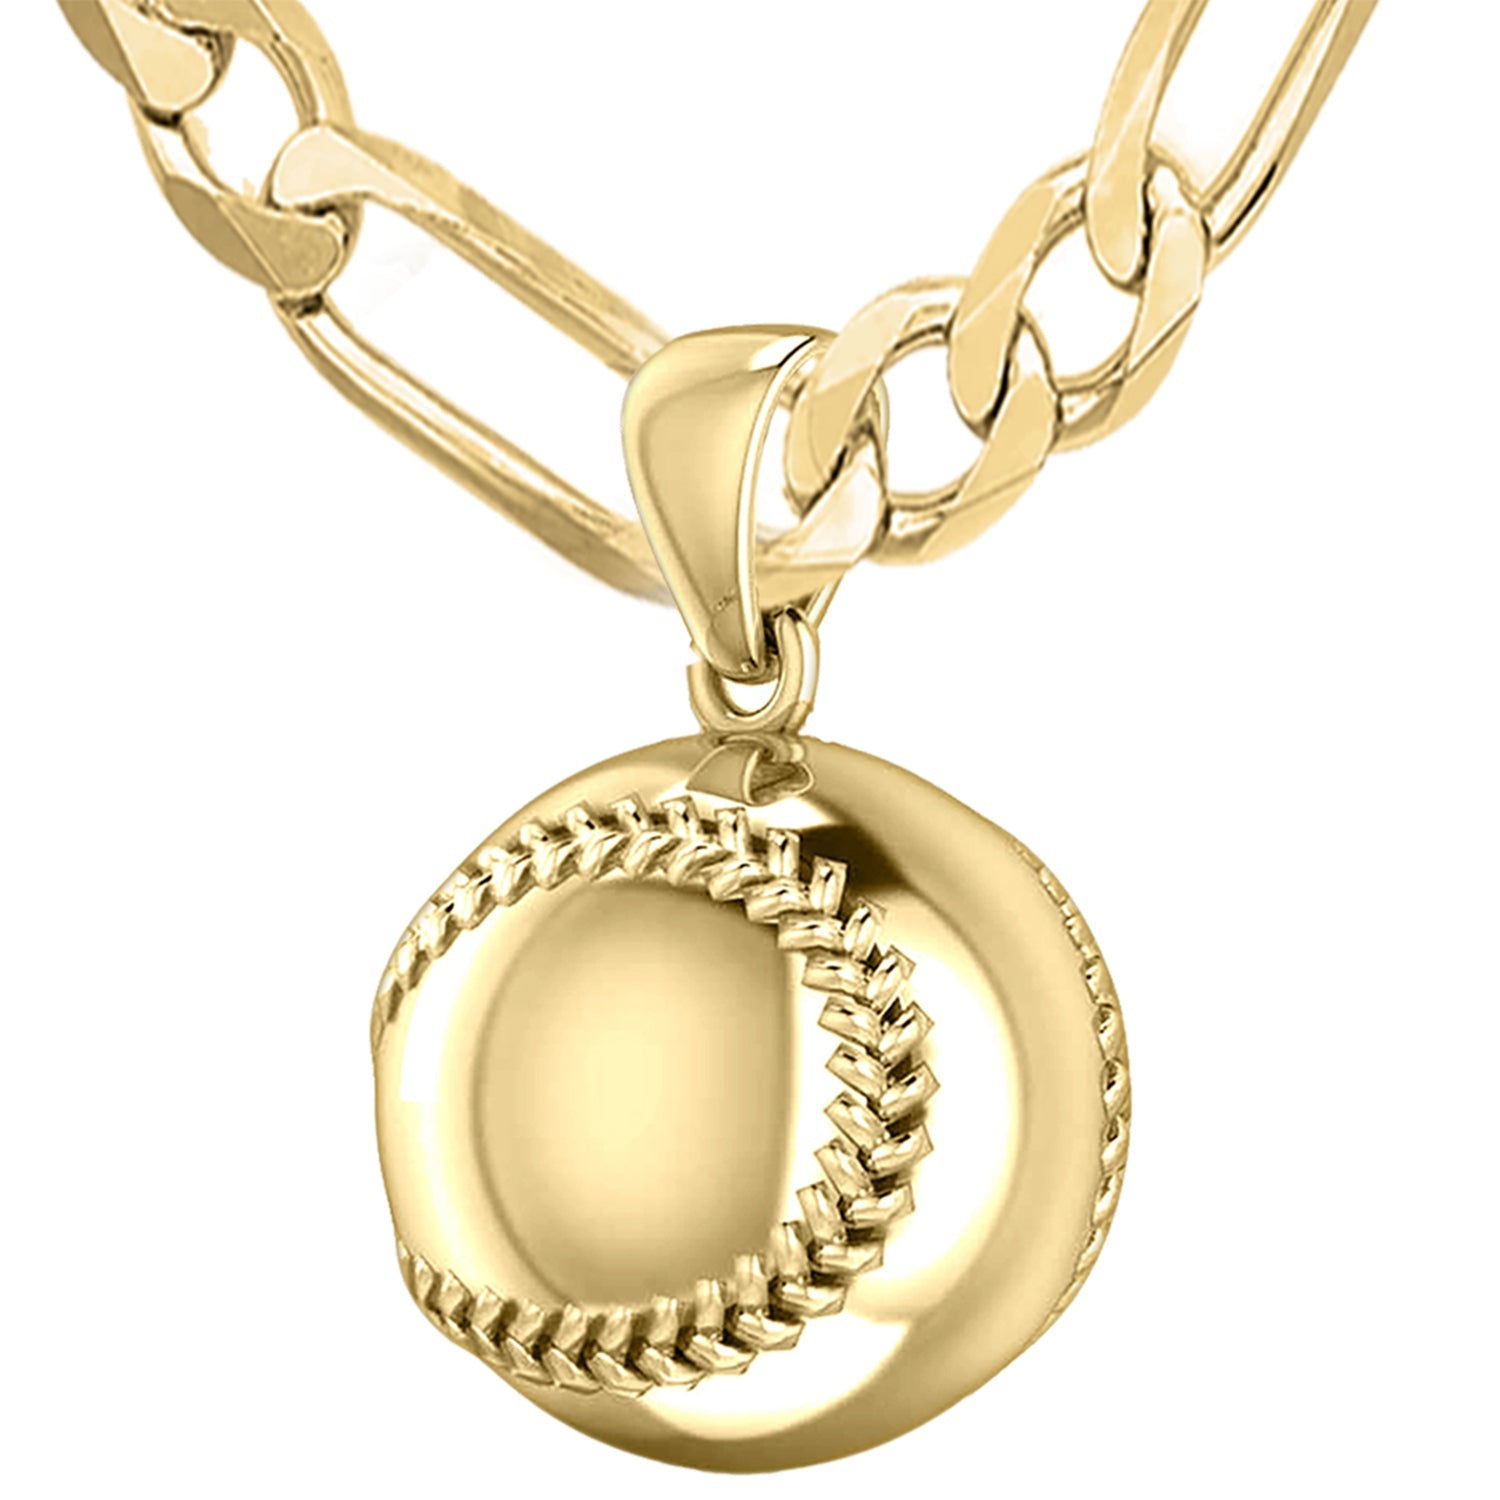 Large 10K or 14K Yellow Gold 3D Baseball Sport Ball Pendant Necklace, 18.5mm - US Jewels